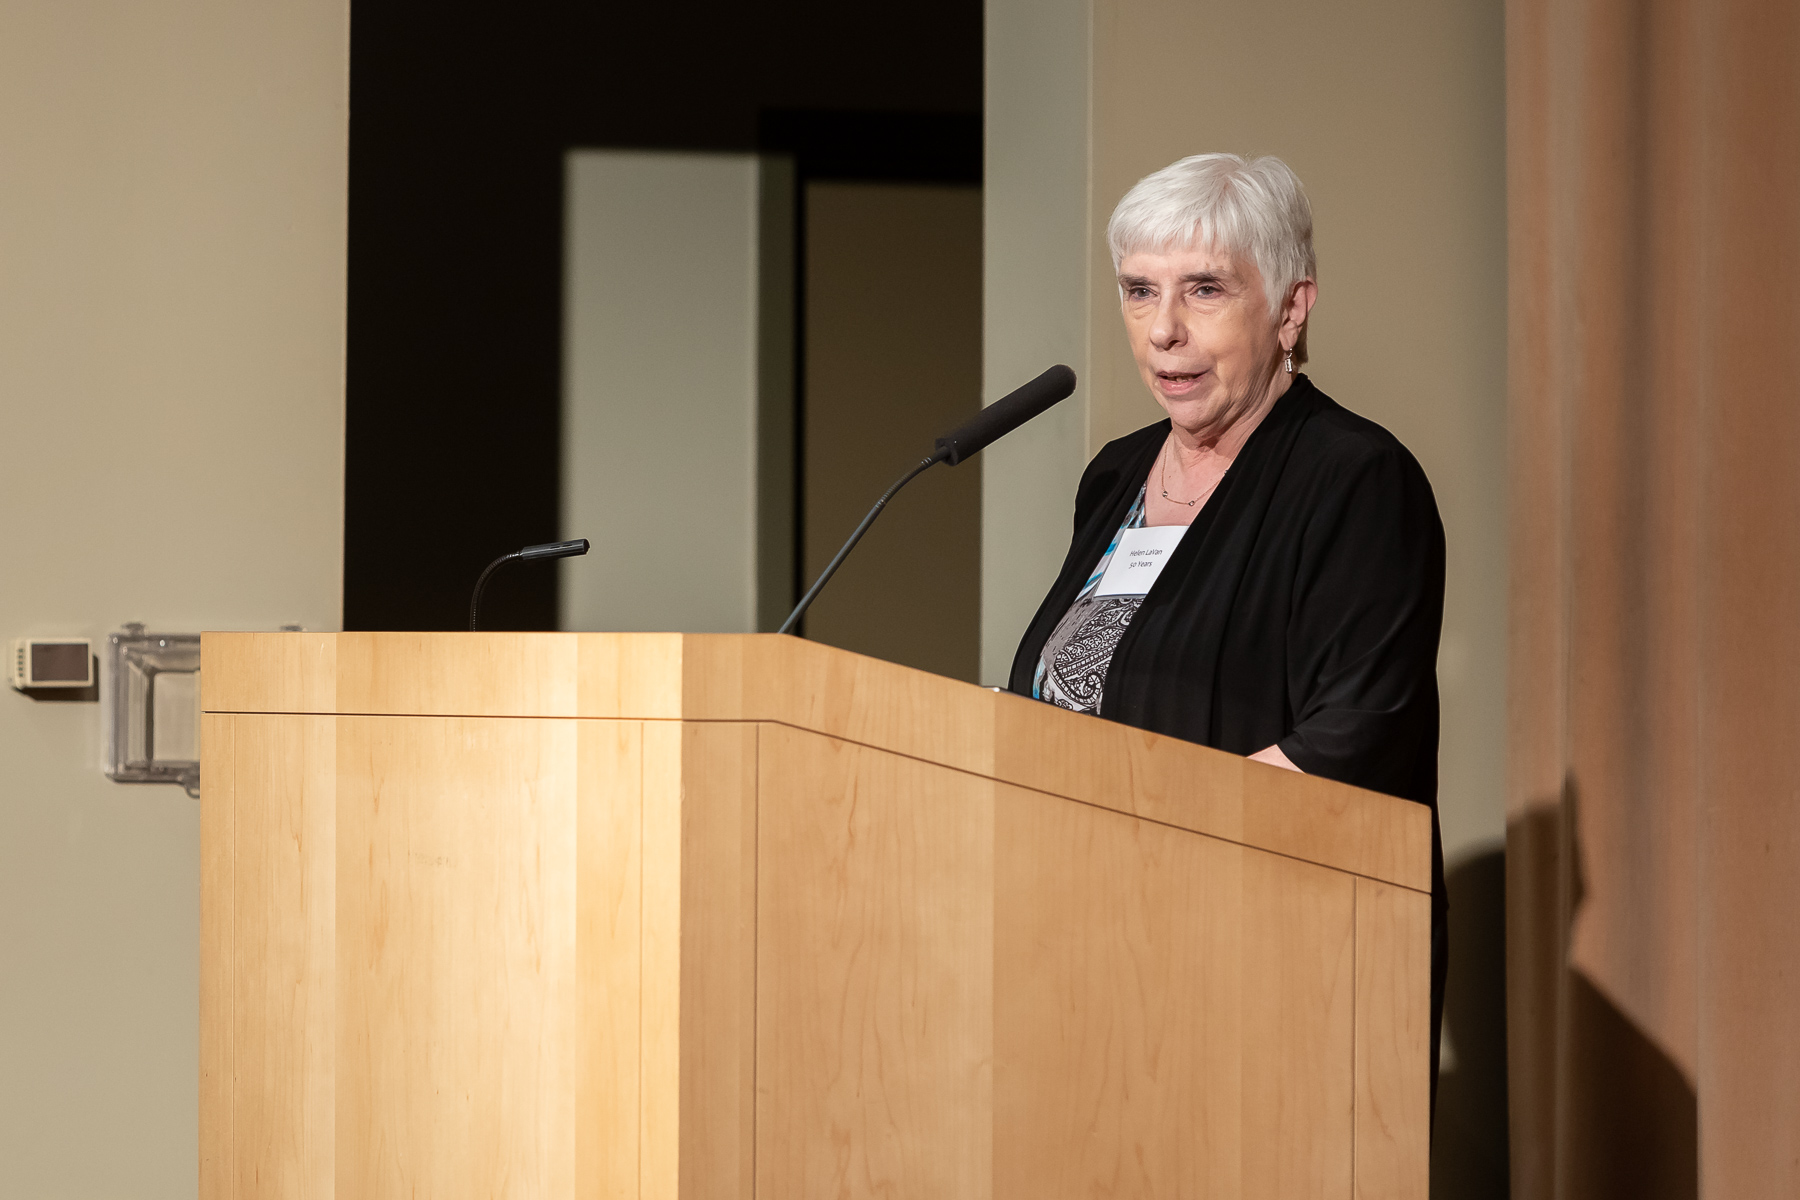 Helen LaVan, professor of management and entrepreneurship in the Driehaus College of Business, who started at DePaul in 1969, reflects on her 50 years of teaching business classes. (DePaul University/Jeff Carrion)